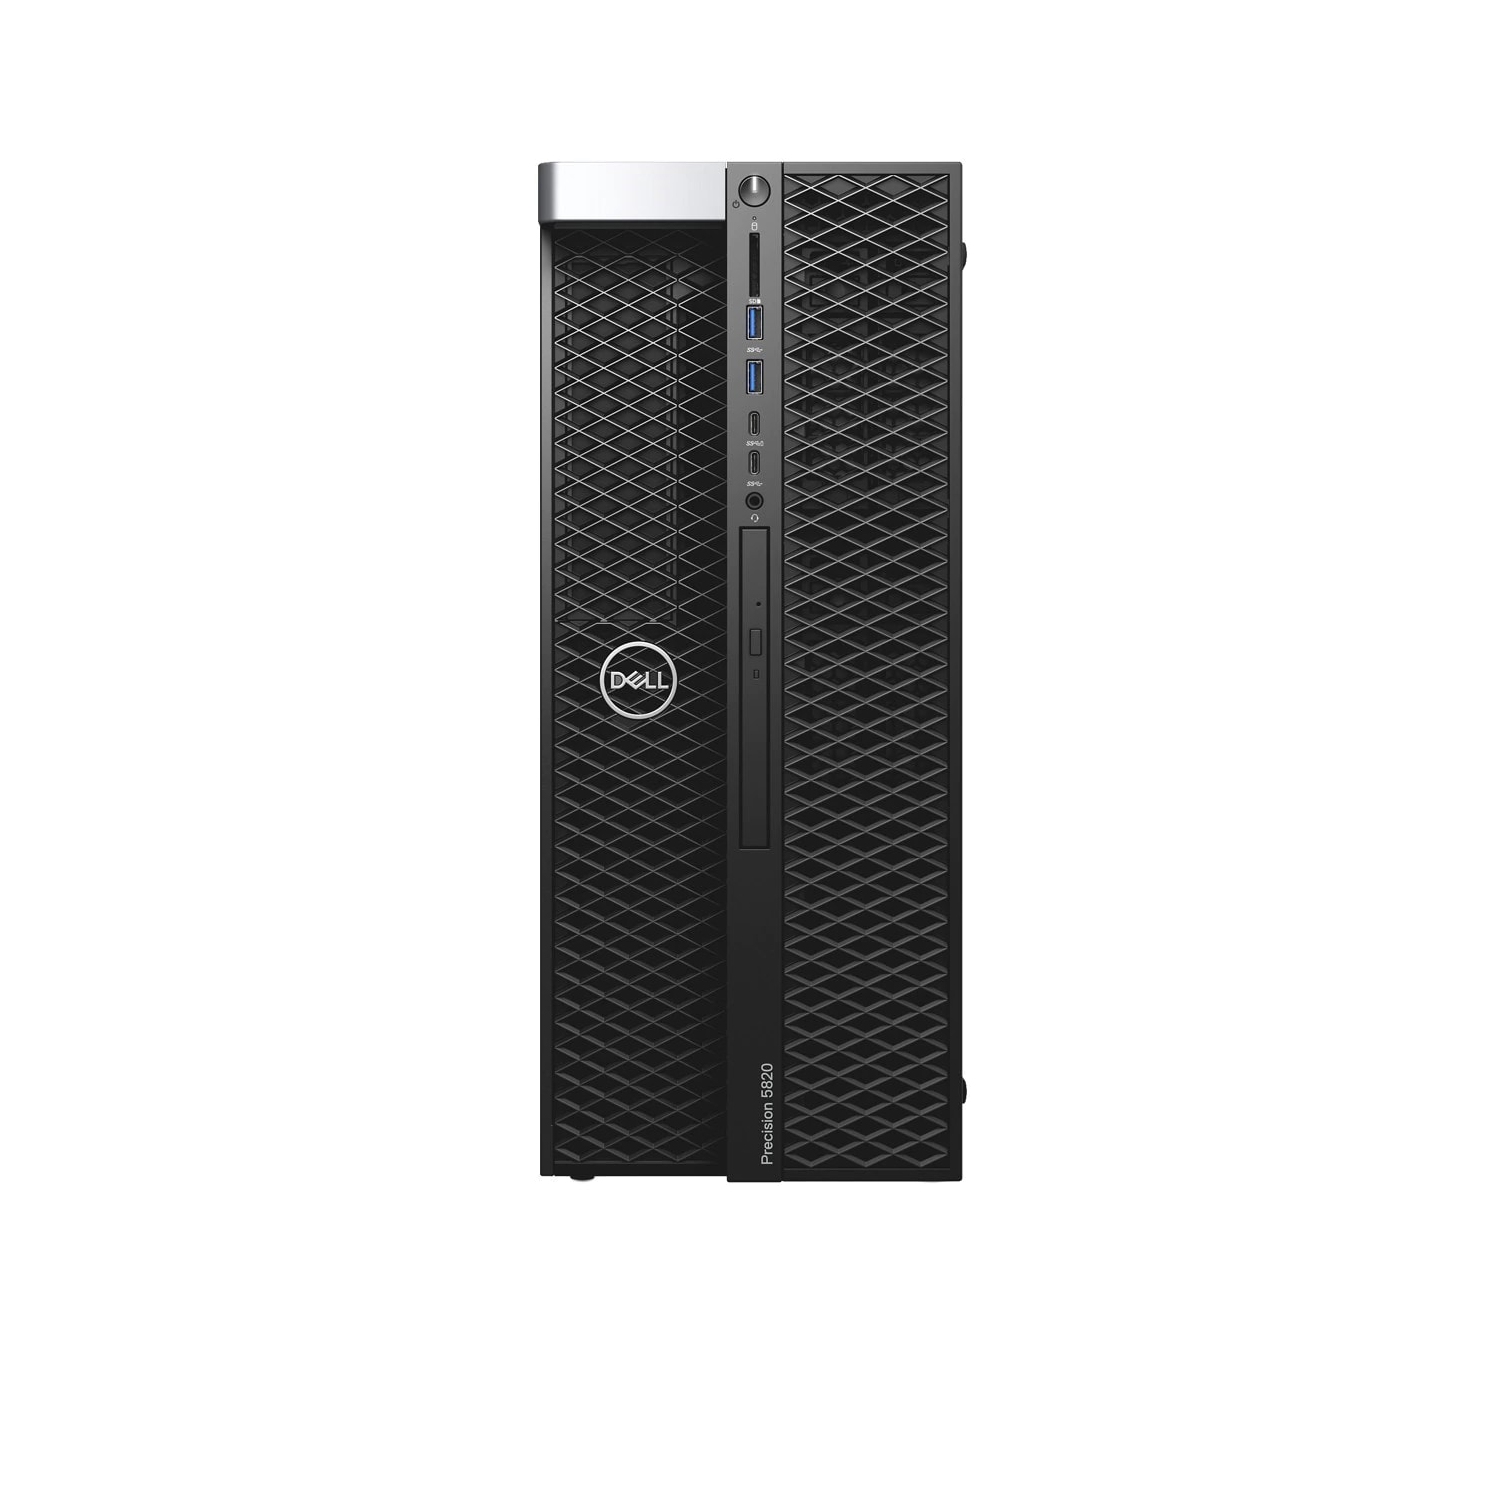 Refurbished (Excellent) - Dell Precision T5820 Workstation Desktop (2018) | Core Xeon W - 512GB SSD - 32GB RAM - RTX 4000 | 10 Cores @ 4.5 GHz Certified Refurbished